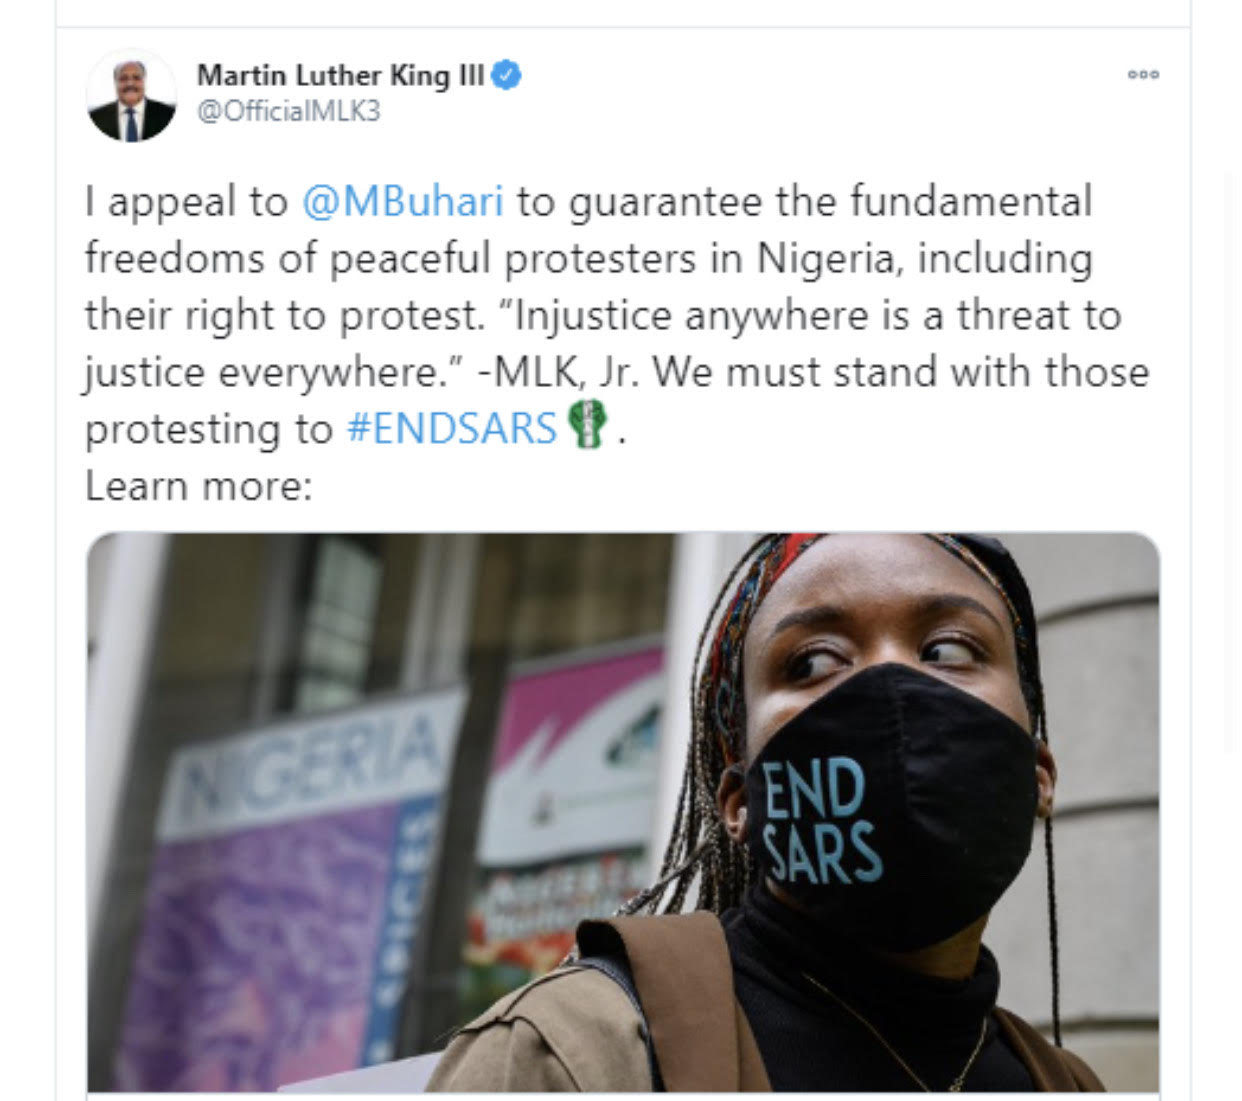 nigeria news end sars injustice anywhere is a threat to justice everywhere martin luther king iii